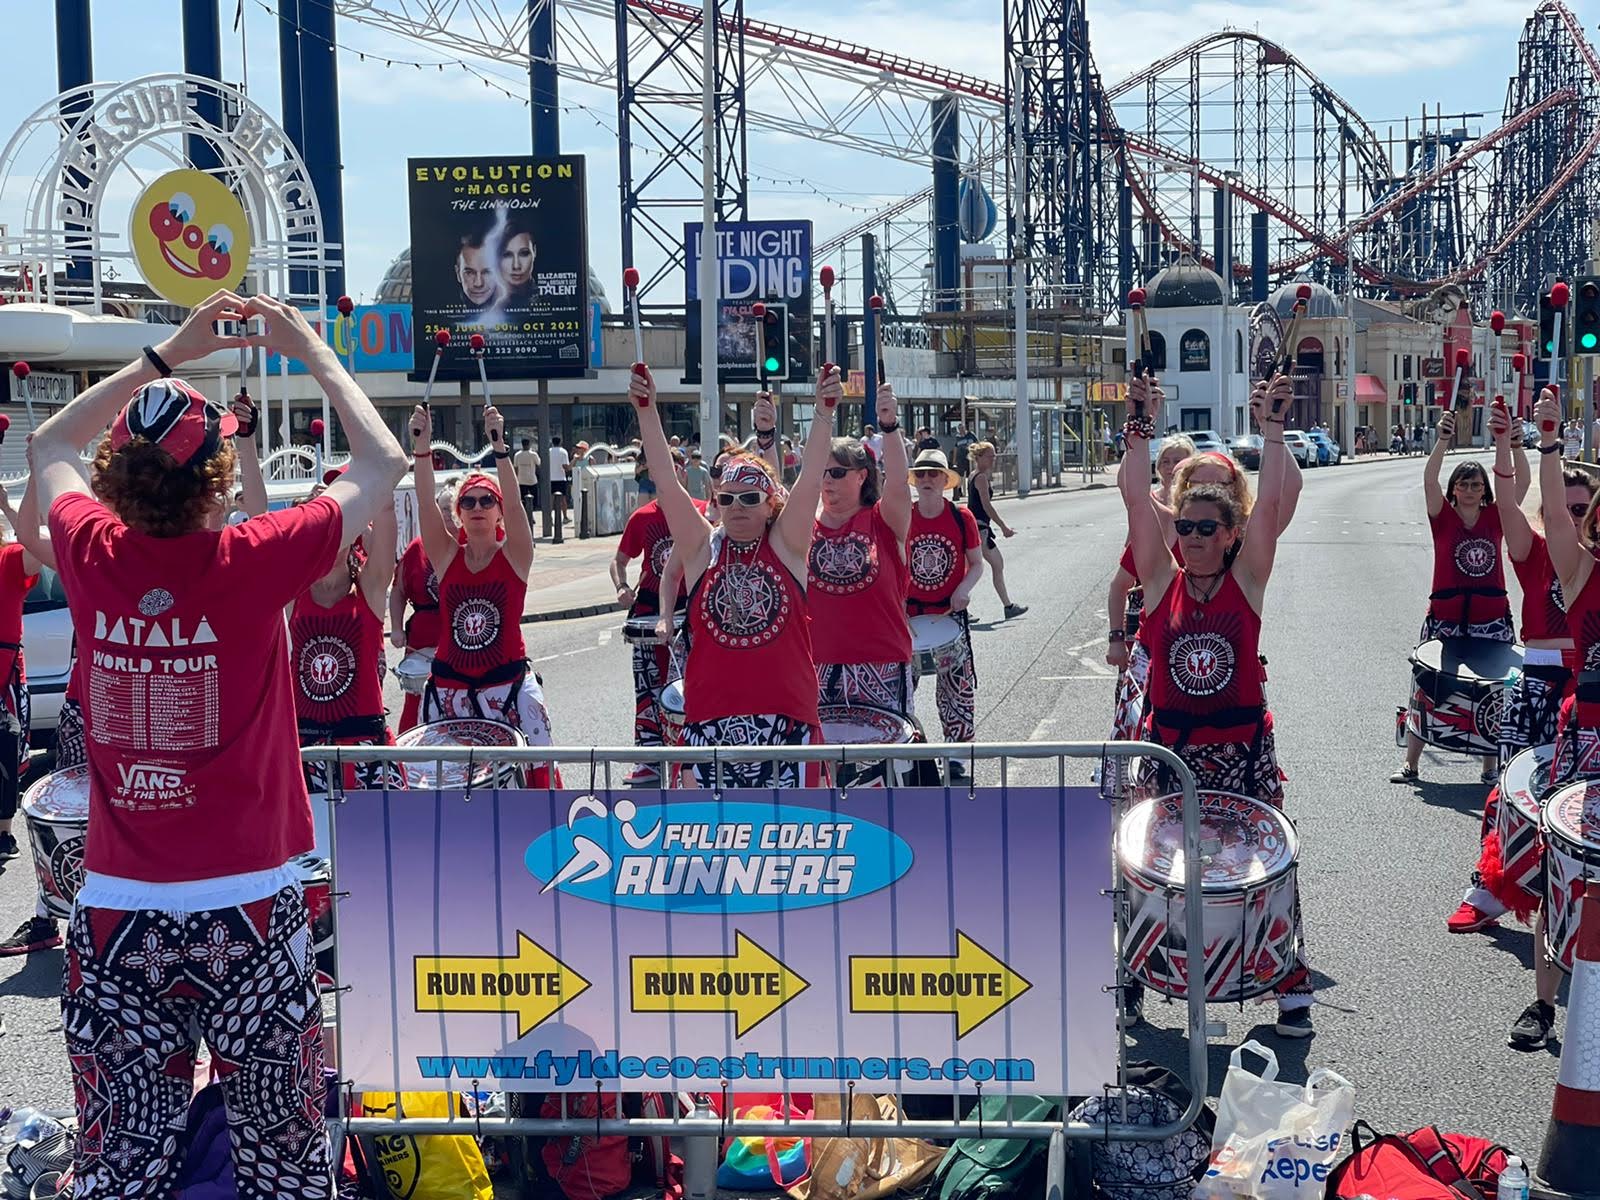 Drummers in front of Blackpool rollercoasters